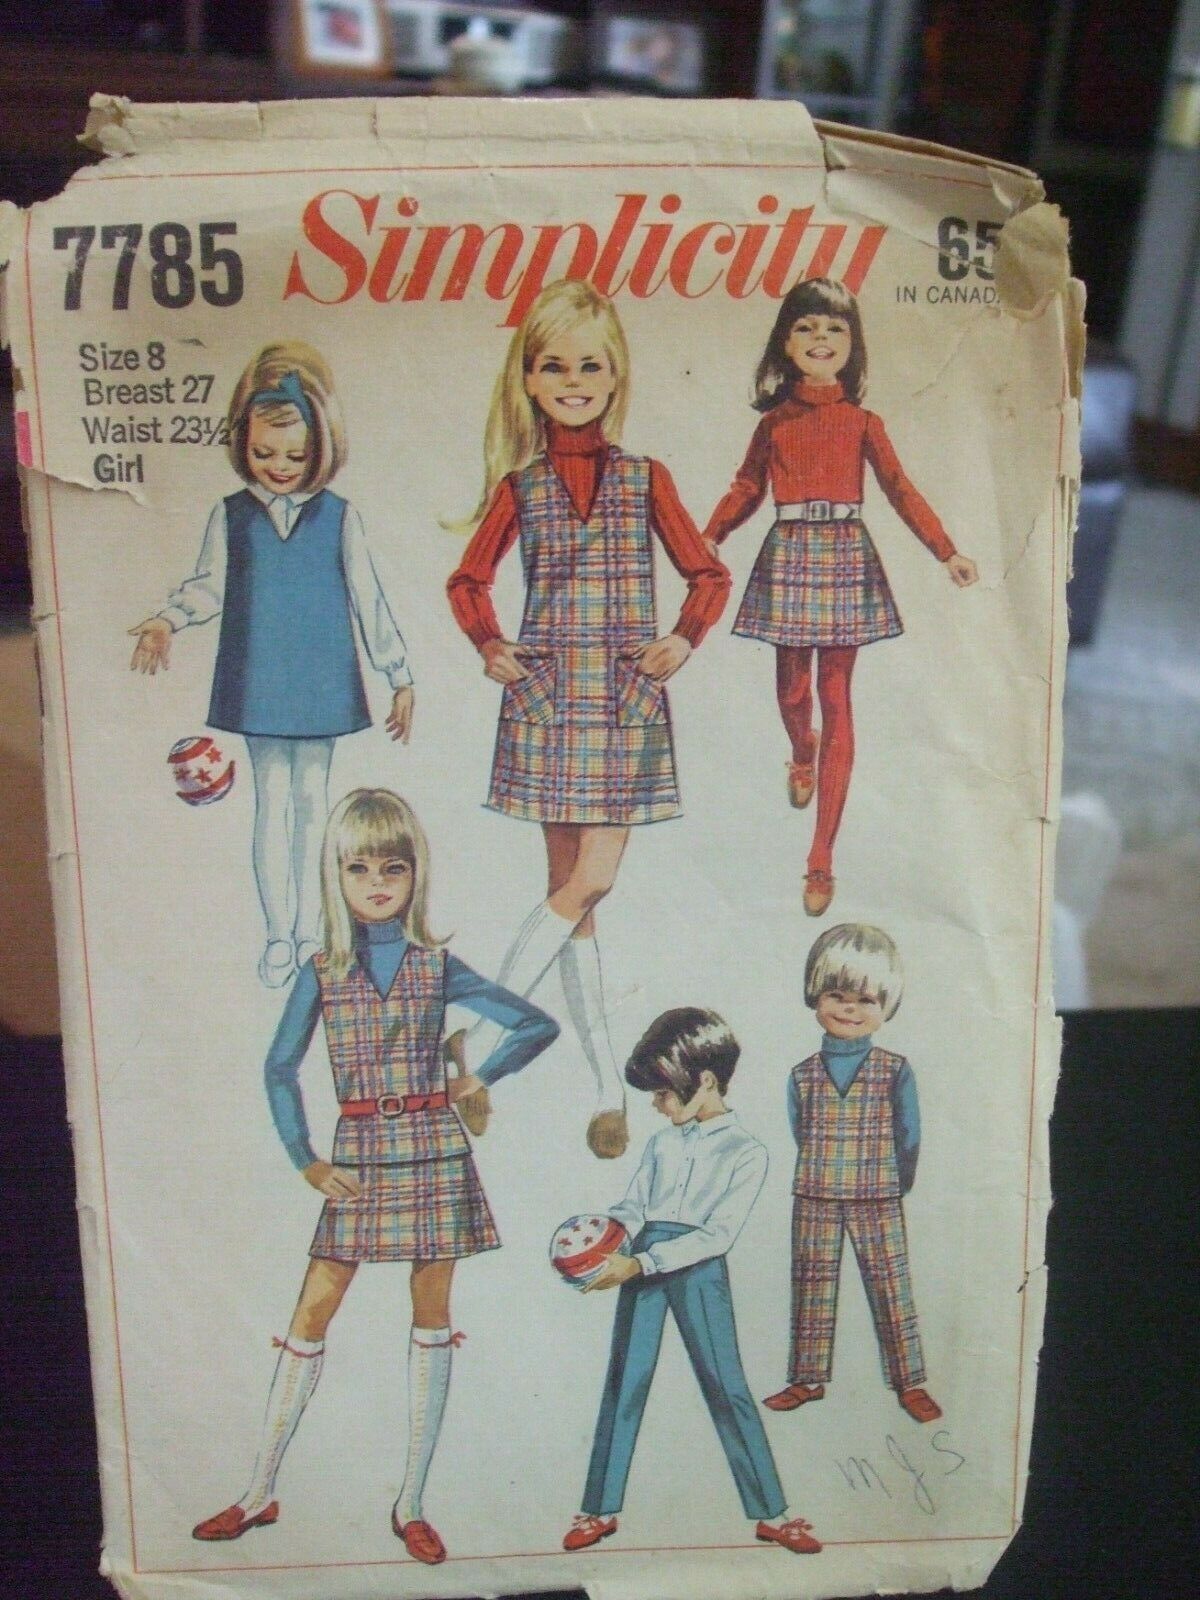 Skirt and Pants Sewing Pattern ..Simplicity 7785  Size 4 Complete Vintage Girls/' Jumper or Top